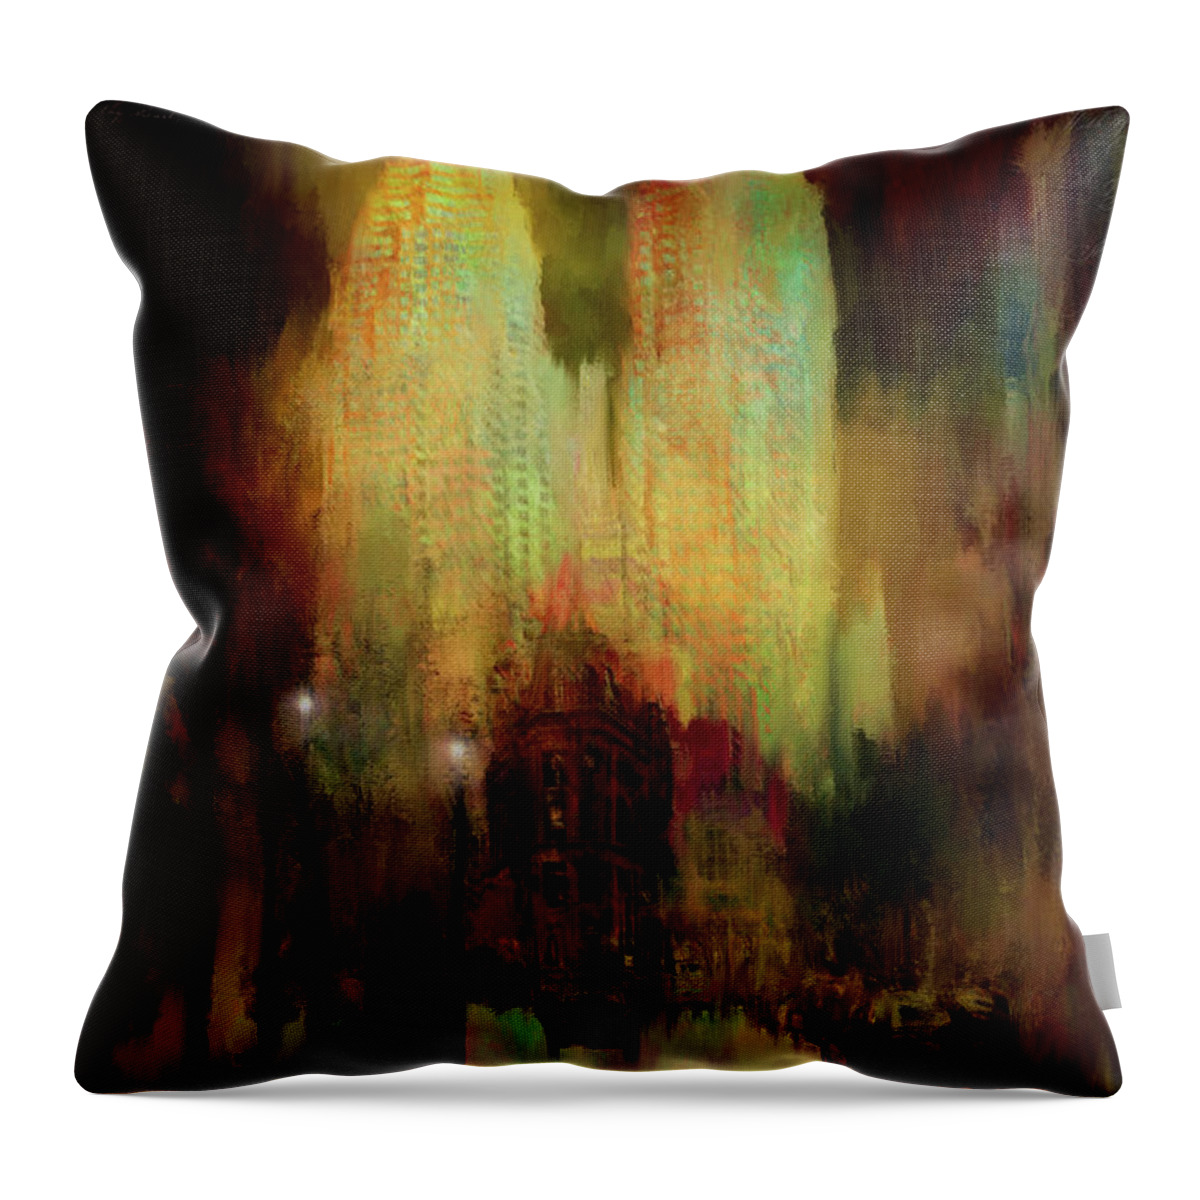 Photosintopaintings Throw Pillow featuring the digital art City Lights by Nicky Jameson